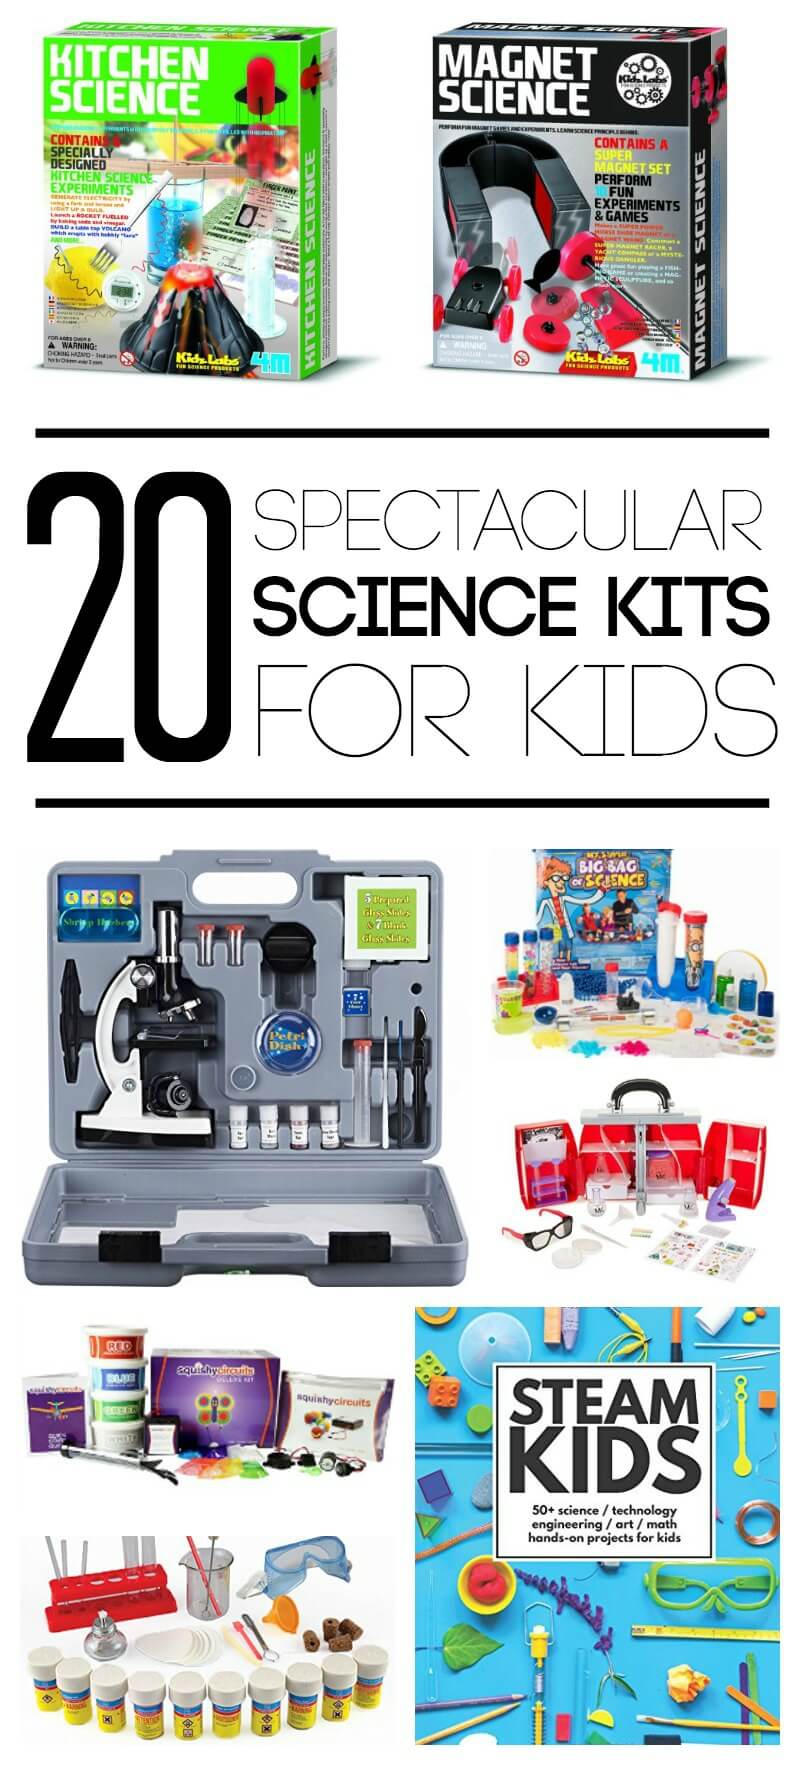 Spectacular Science Kits for Kids